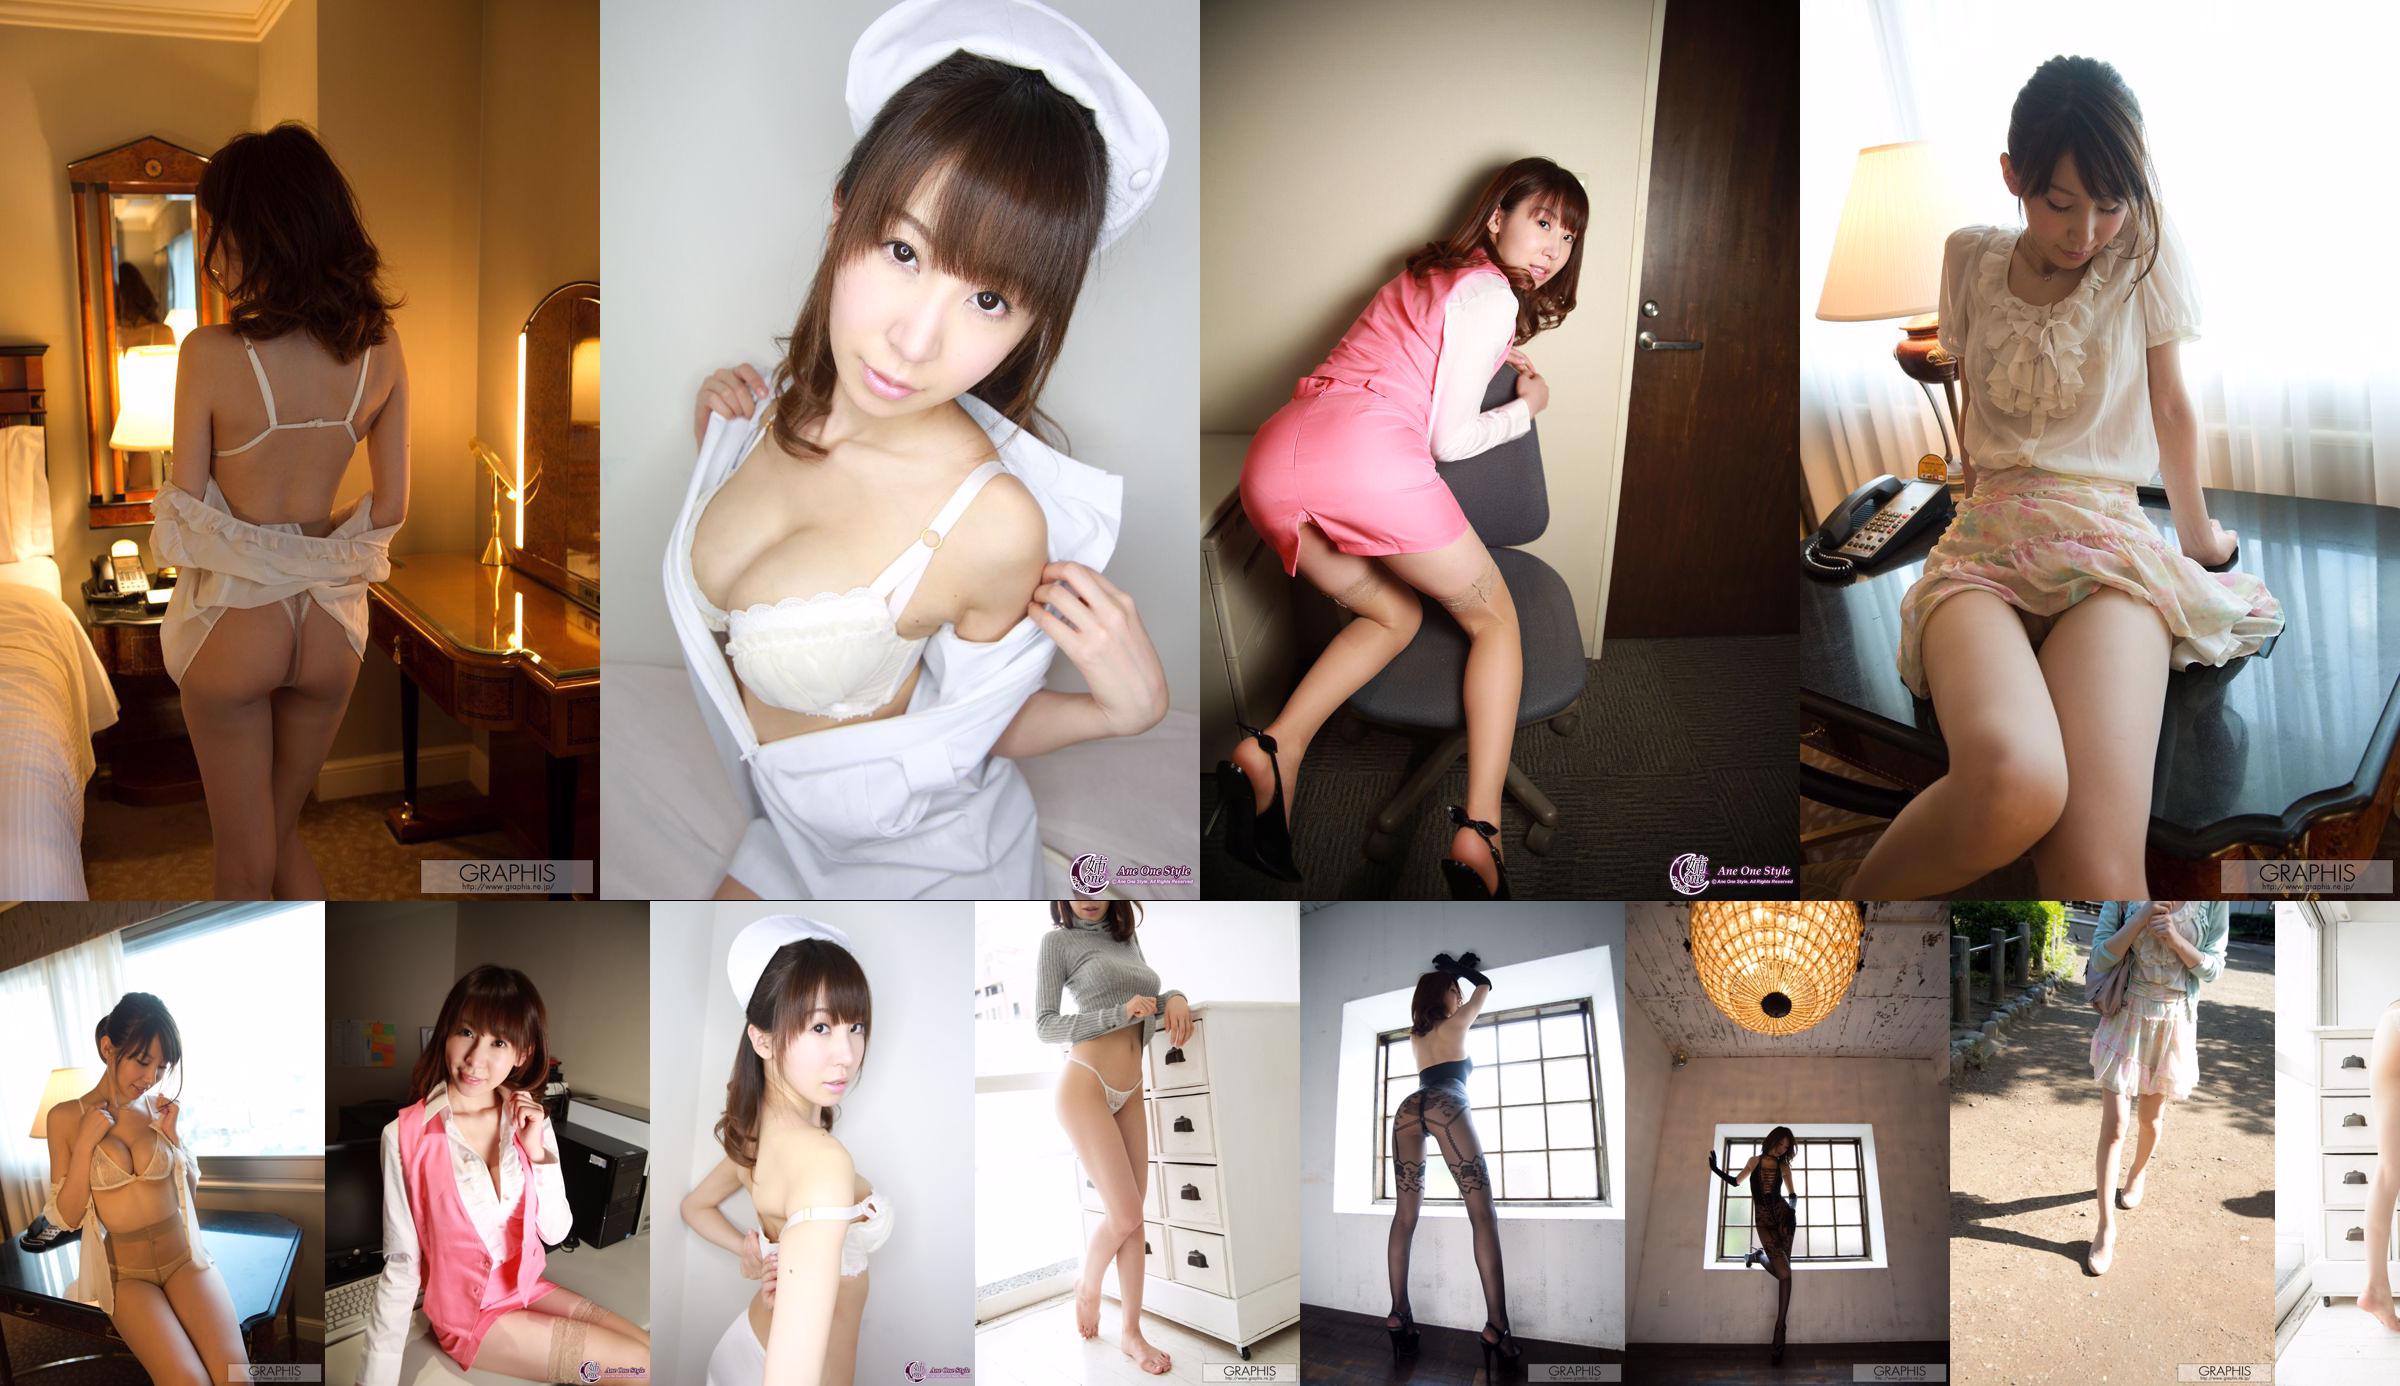 Chibana Meisa / Chibana Meisa [Graphis] First Gravure First take off daughter No.de32c4 Page 2